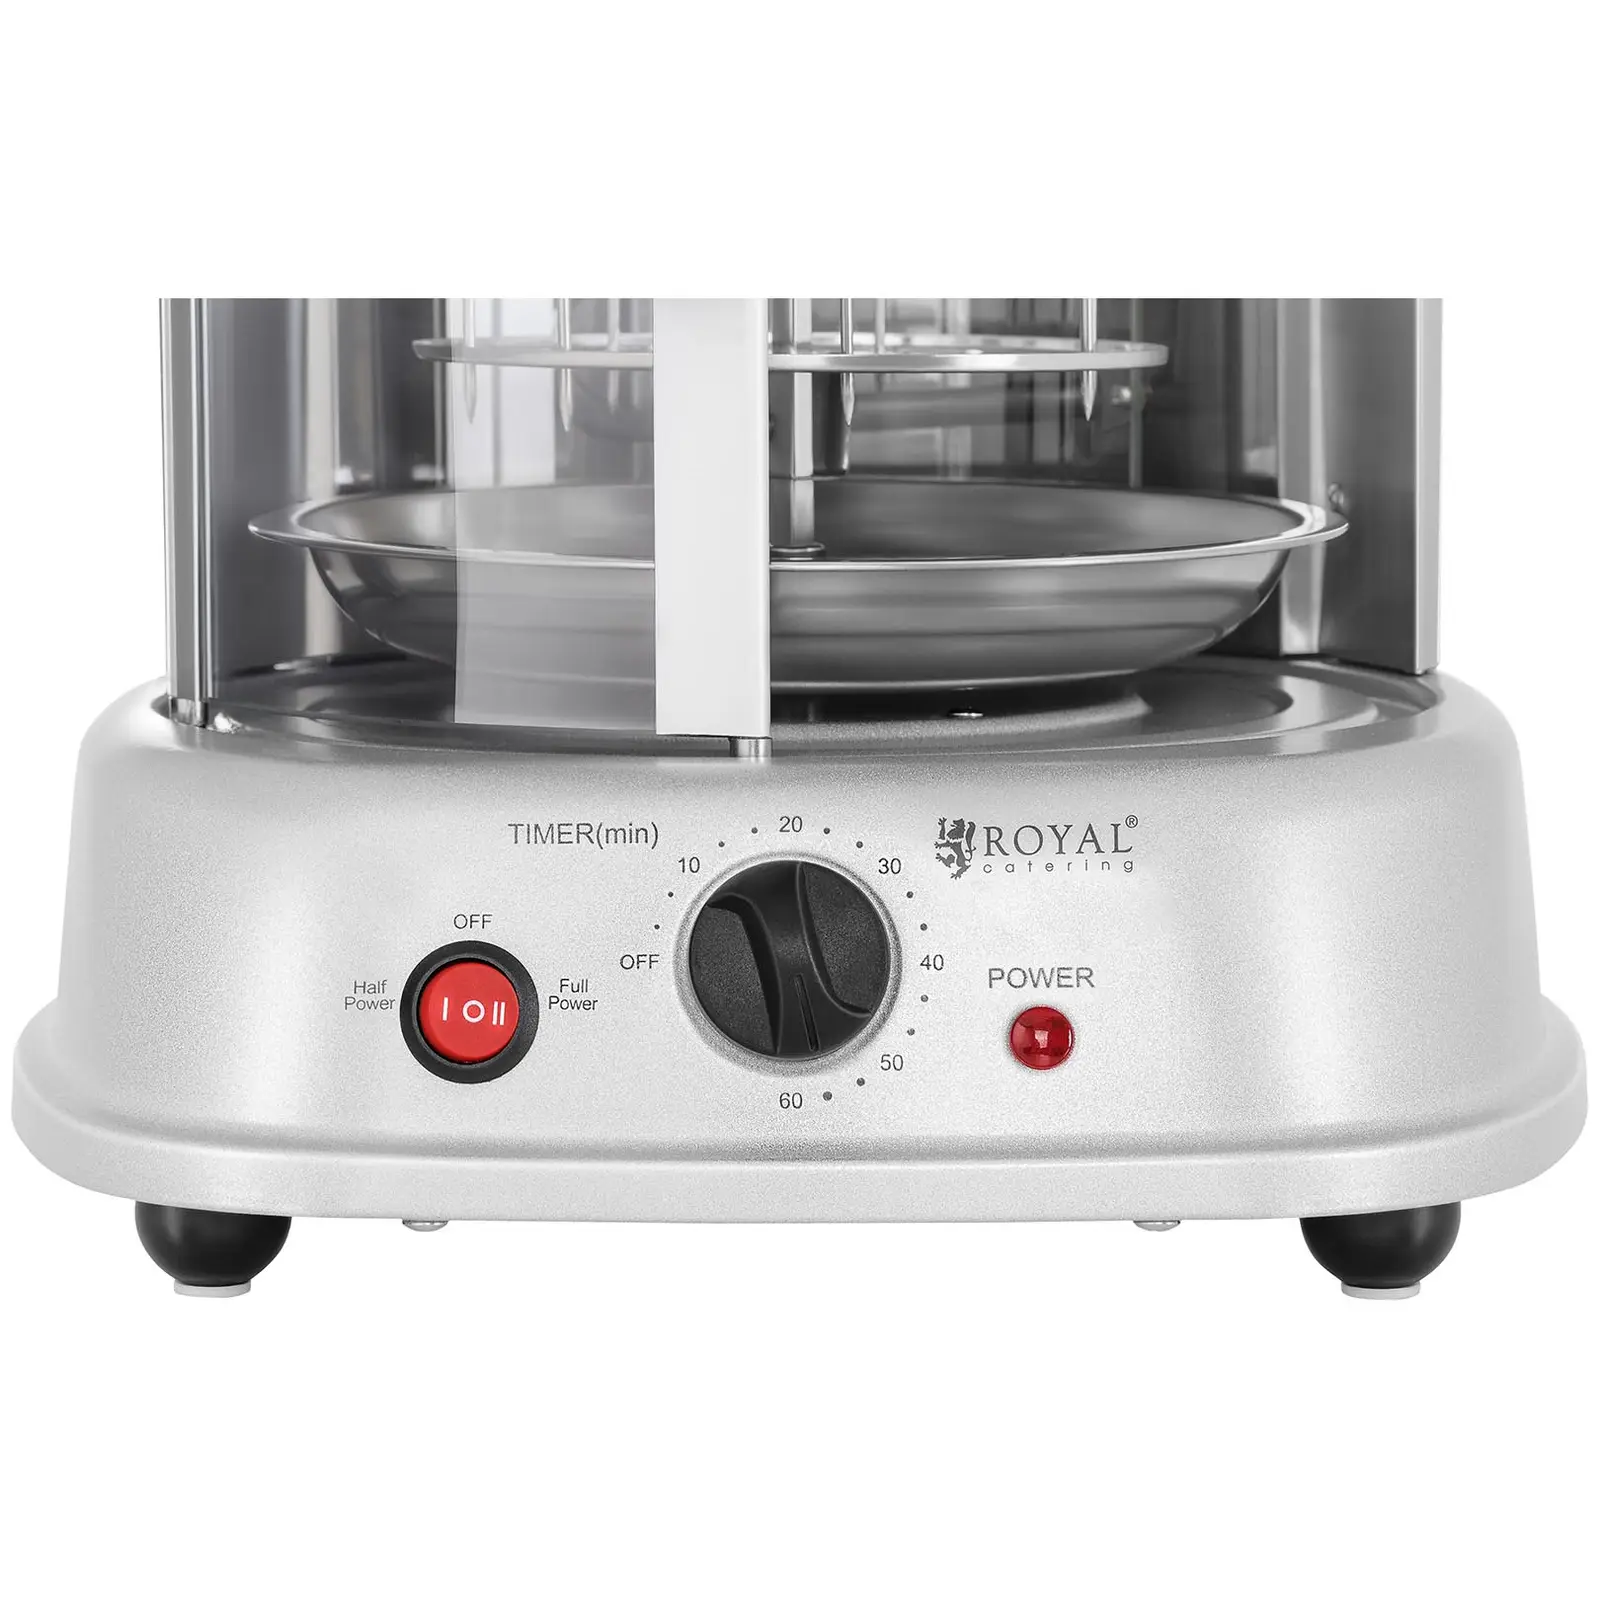 Outlet Grill pionowy - 1500 W - 3w1